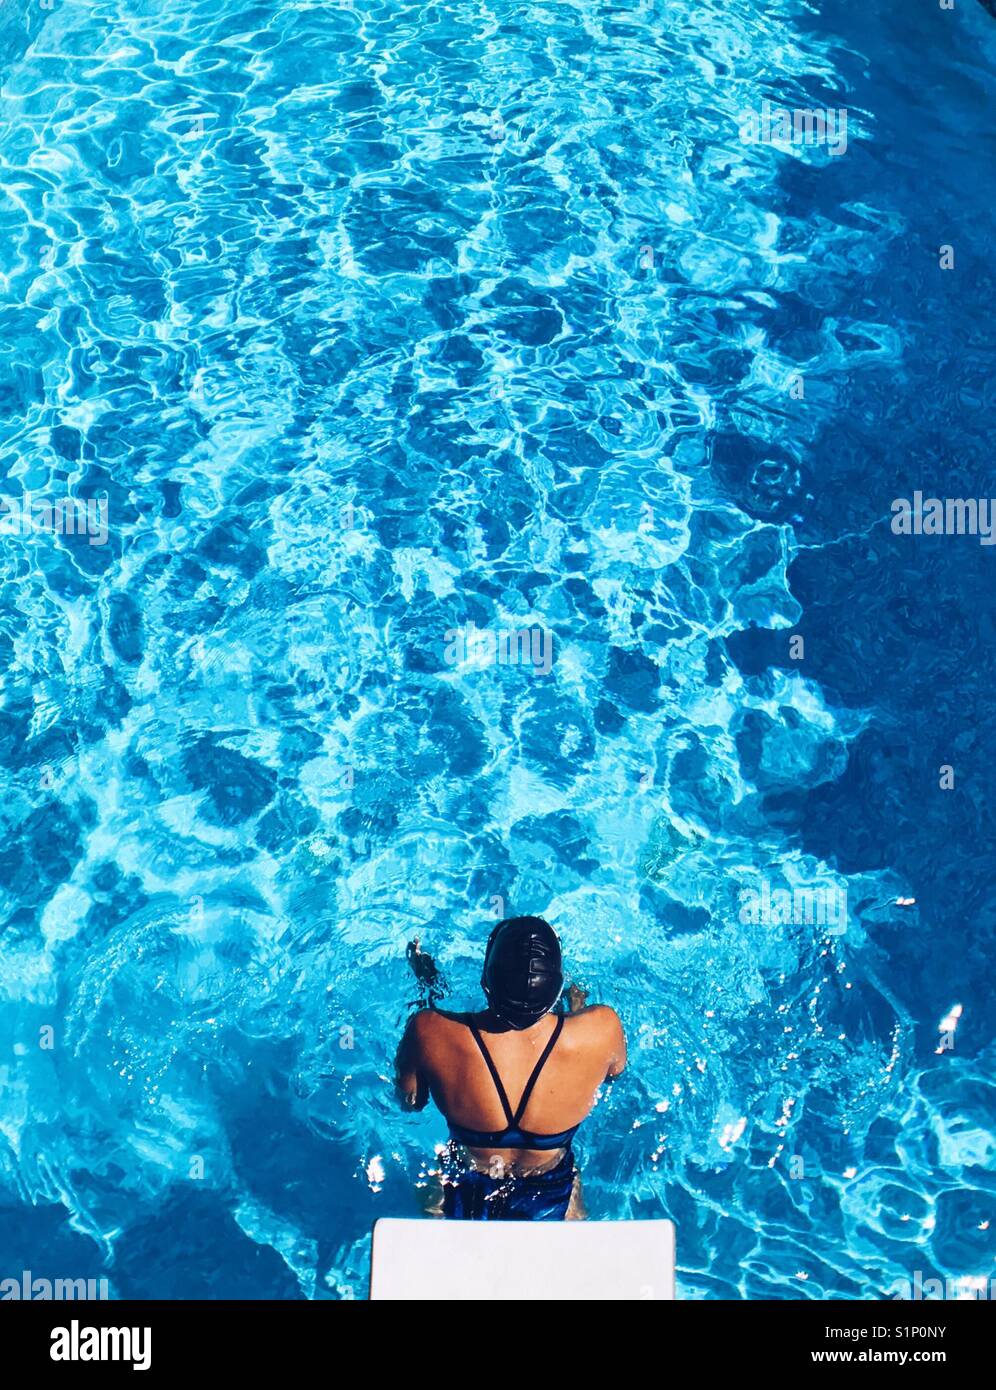 Woman swimmer in a outdoor swimming pool on a sunny day. Bright edit. Stock Photo